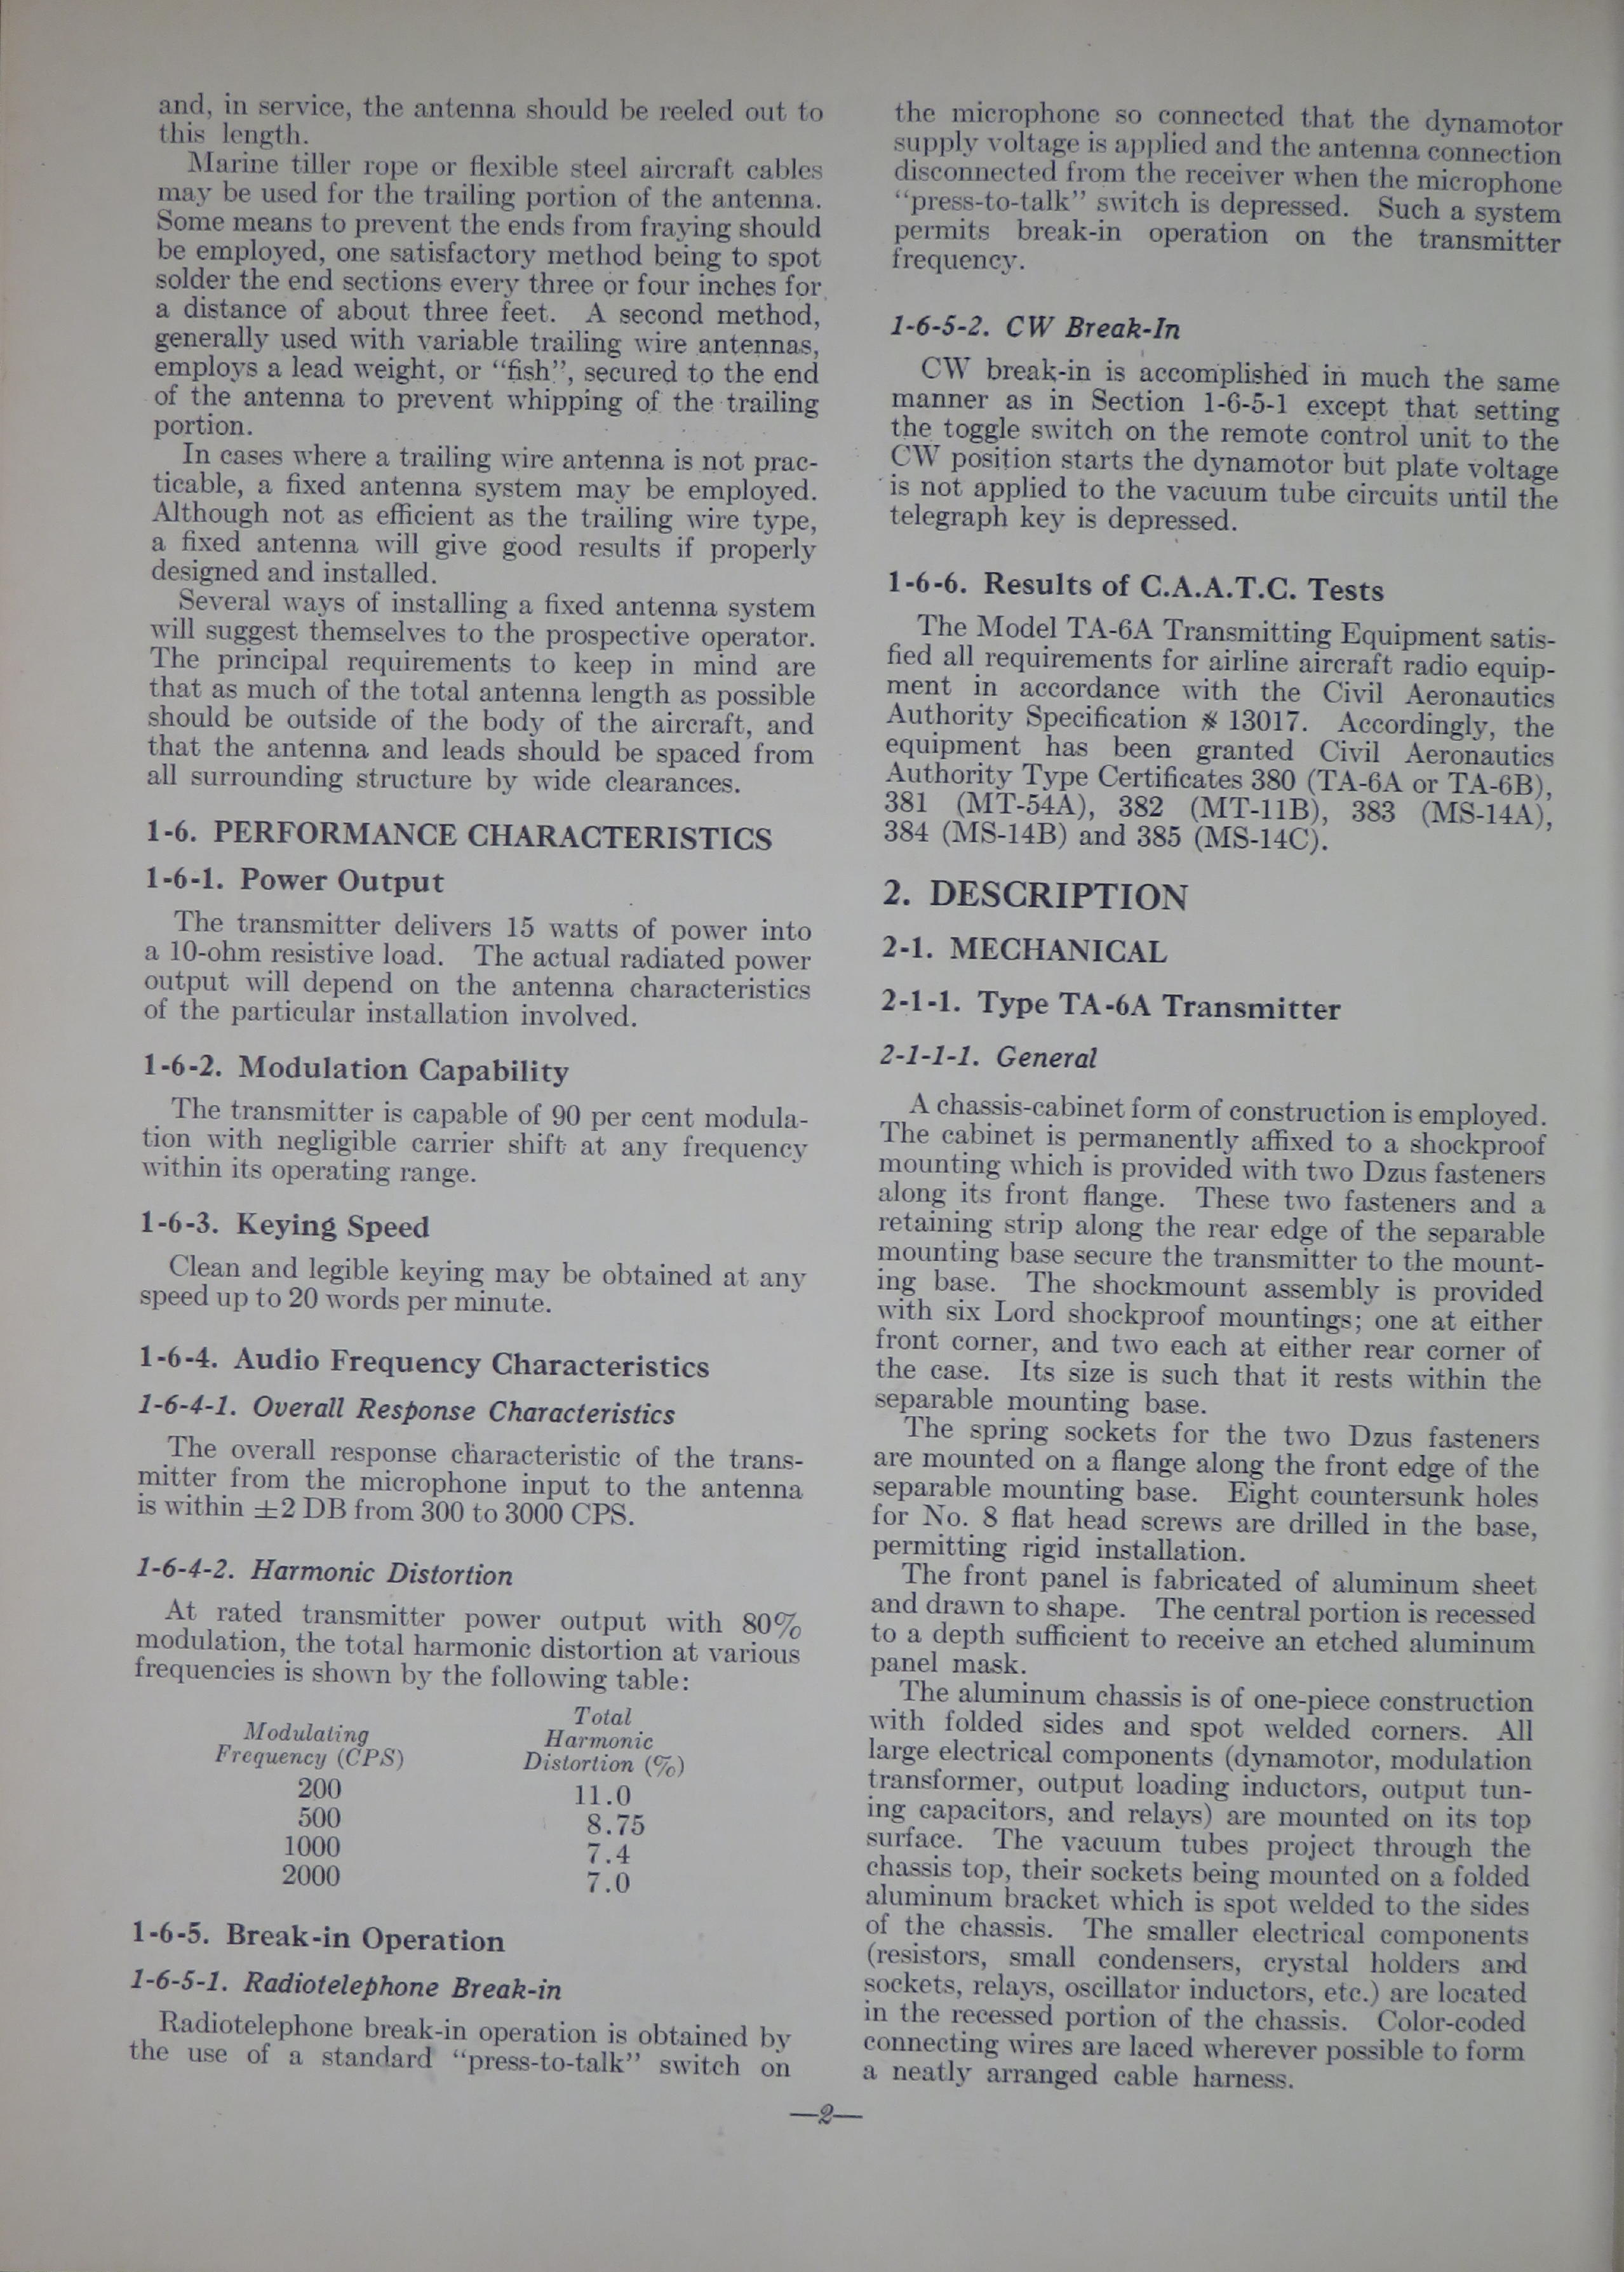 Sample page 8 from AirCorps Library document: Instruction Book for Model TA-6A & TA-6B Aircraft Transmitting Equipment